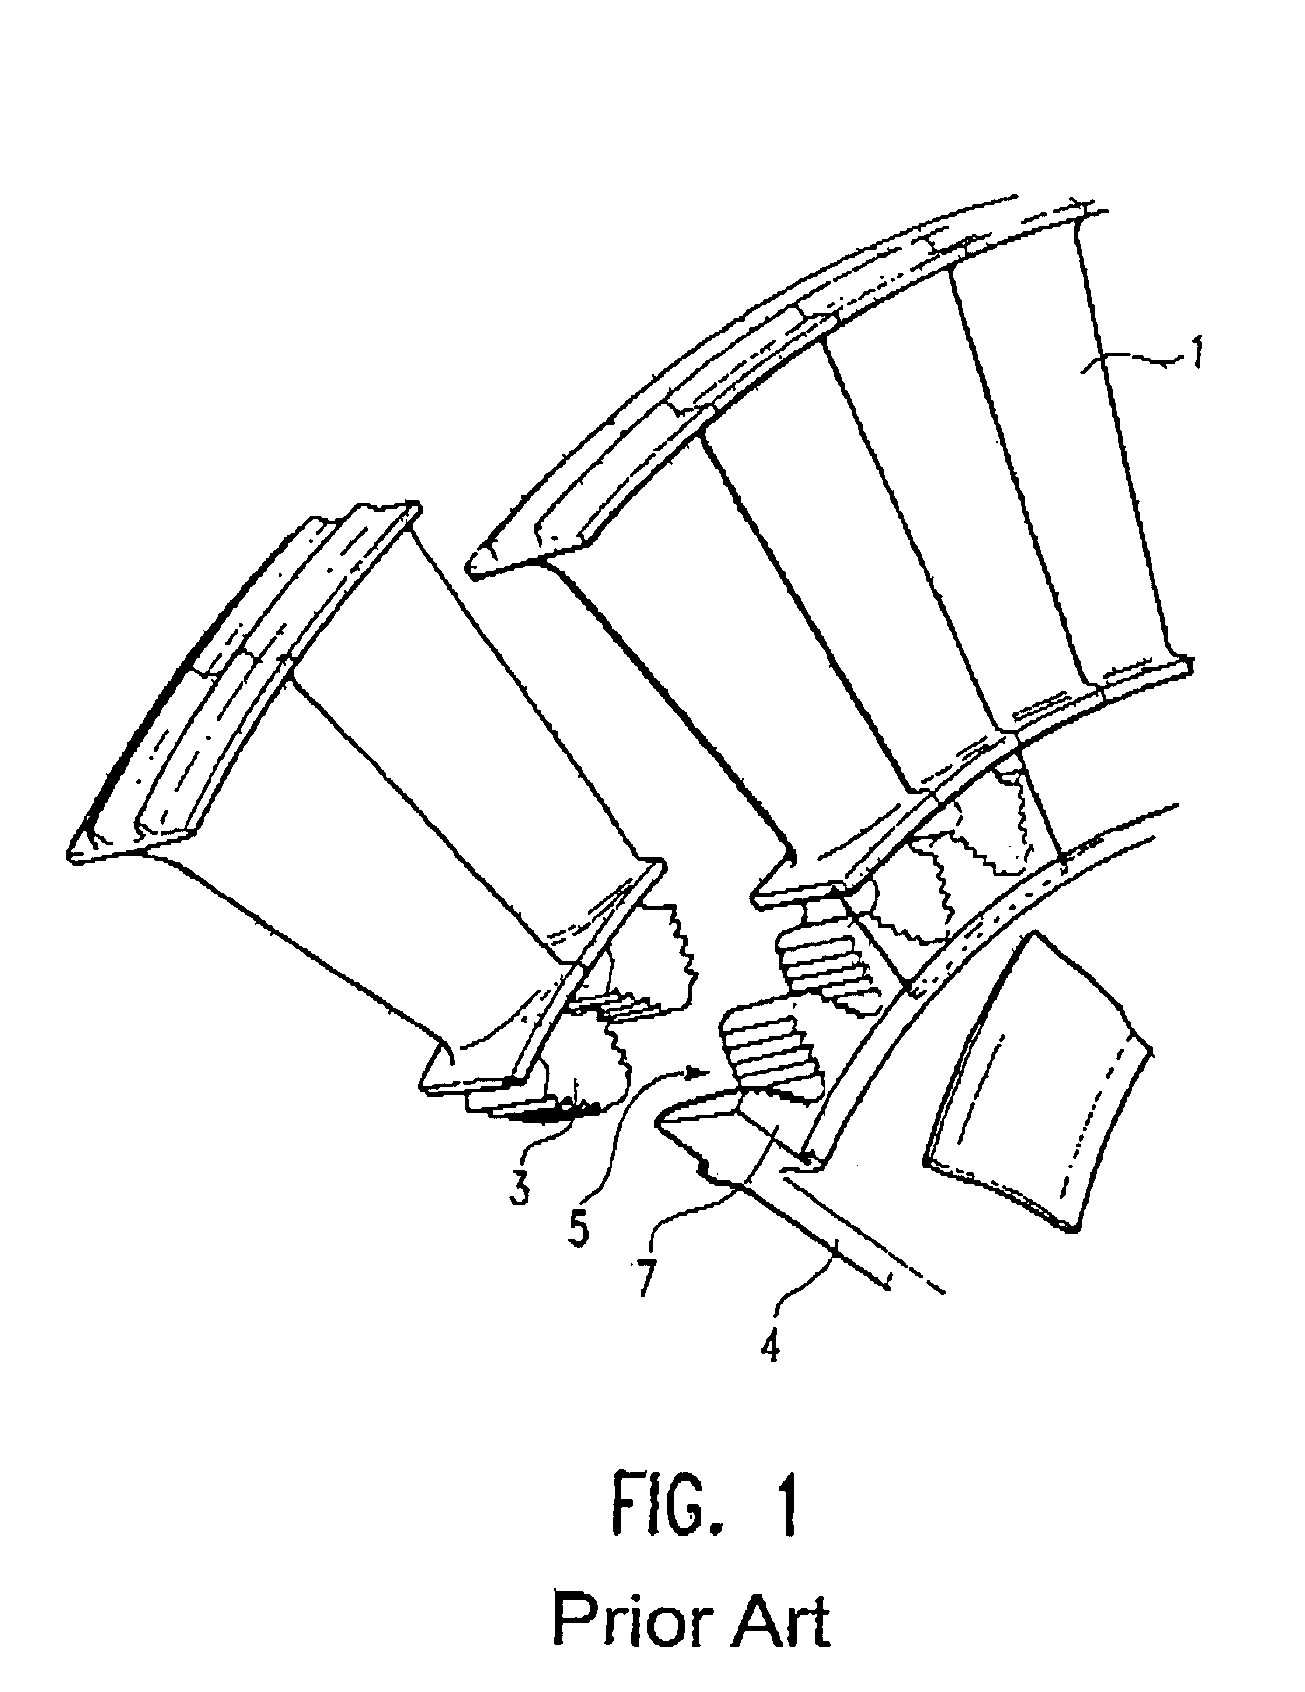 Axial locking device for turbine blades